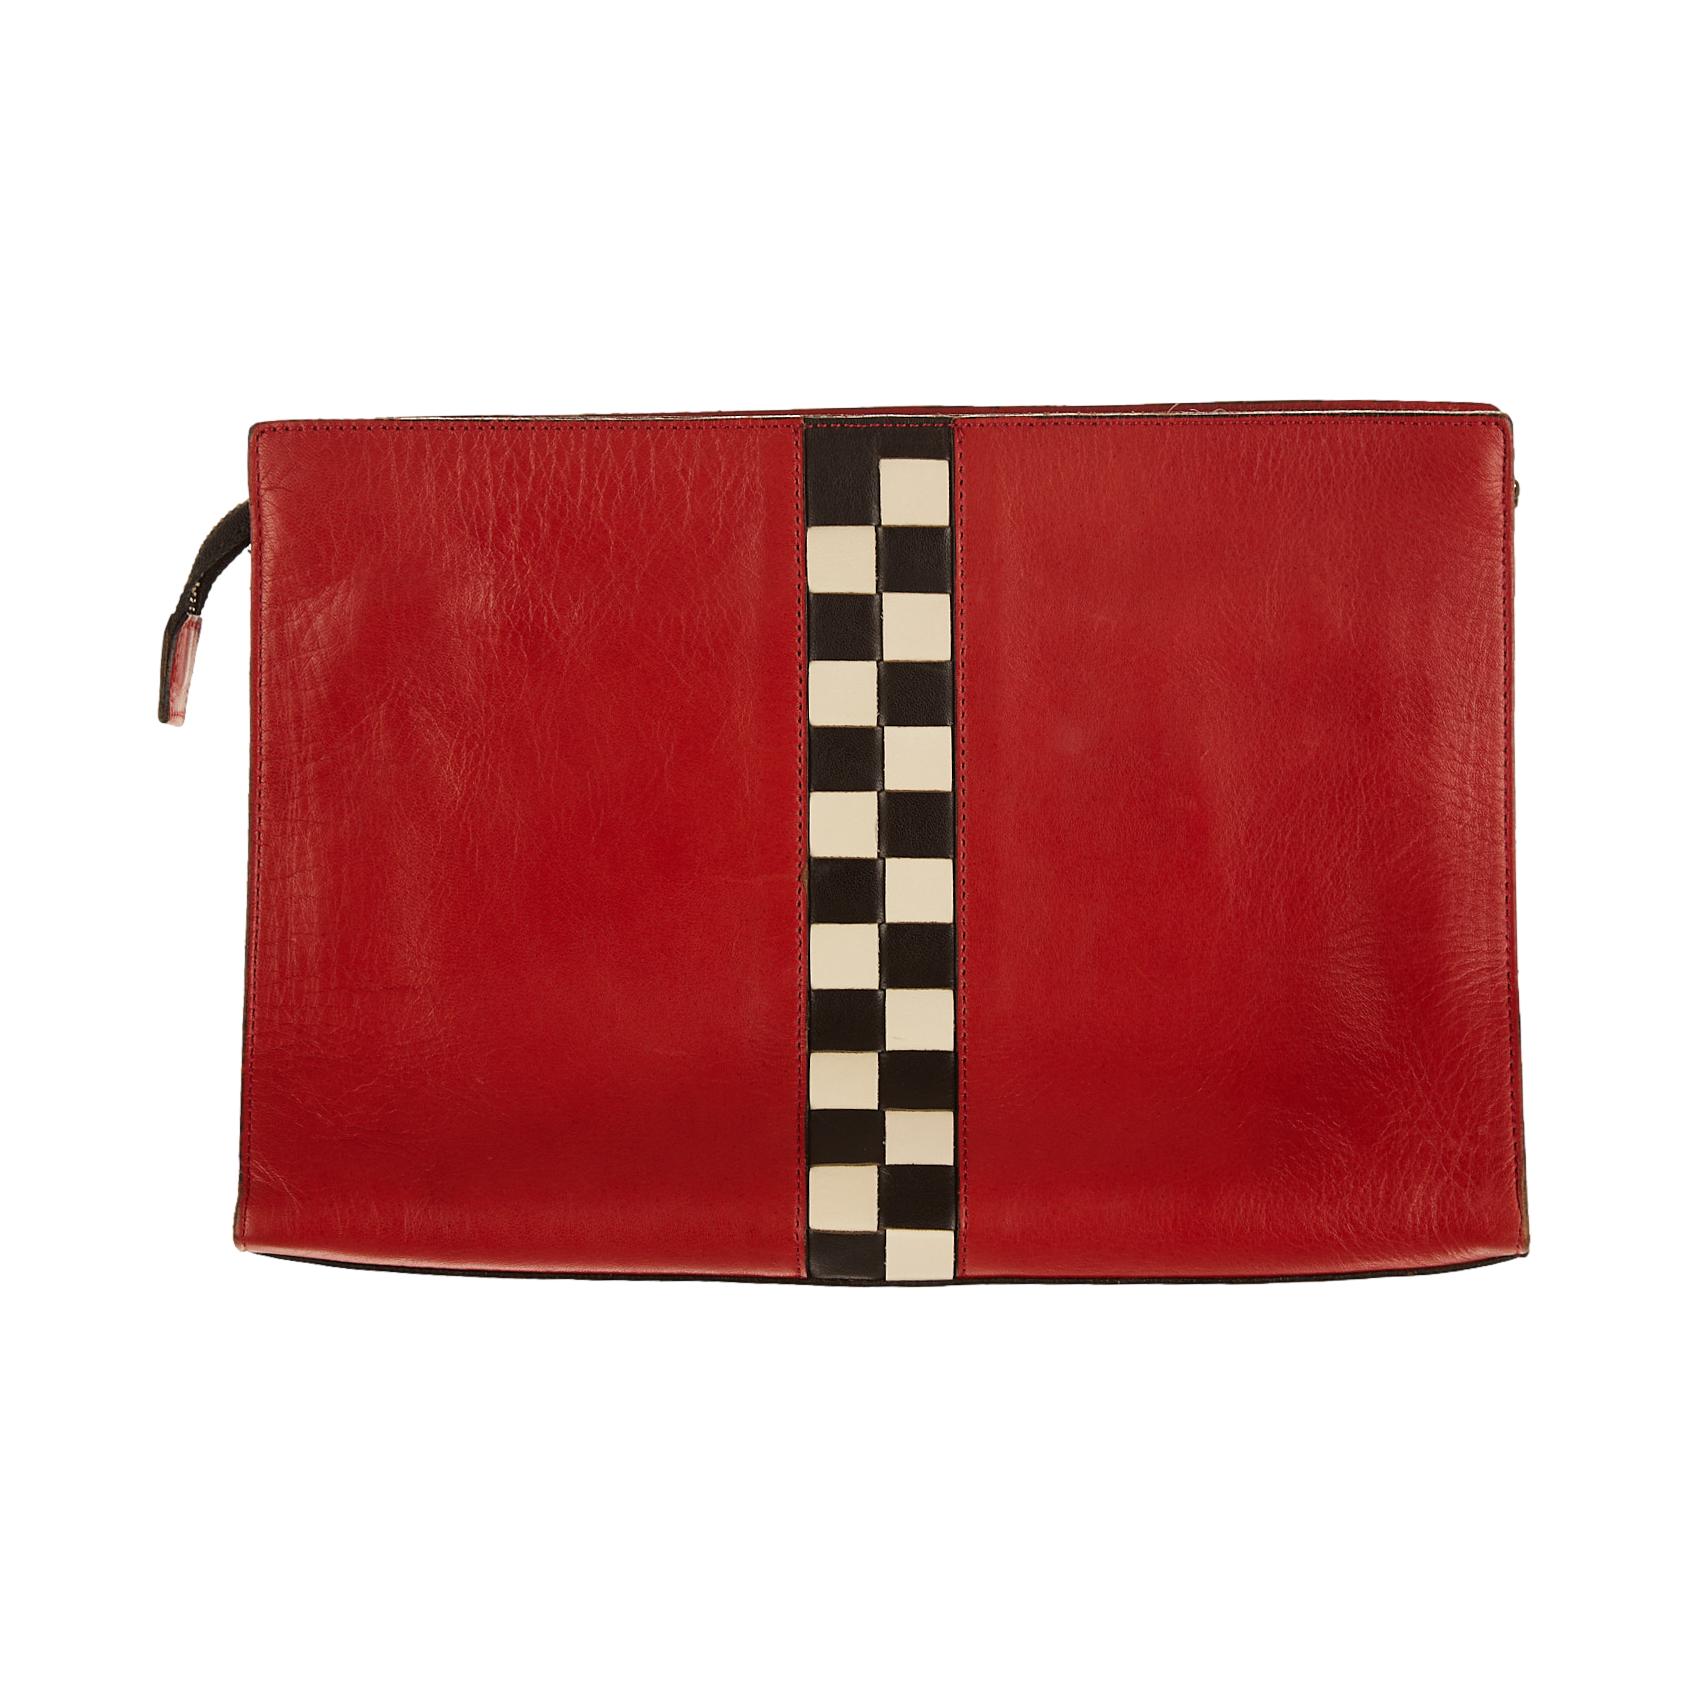 Jean Paul Gaultier Red Checkered Clutch